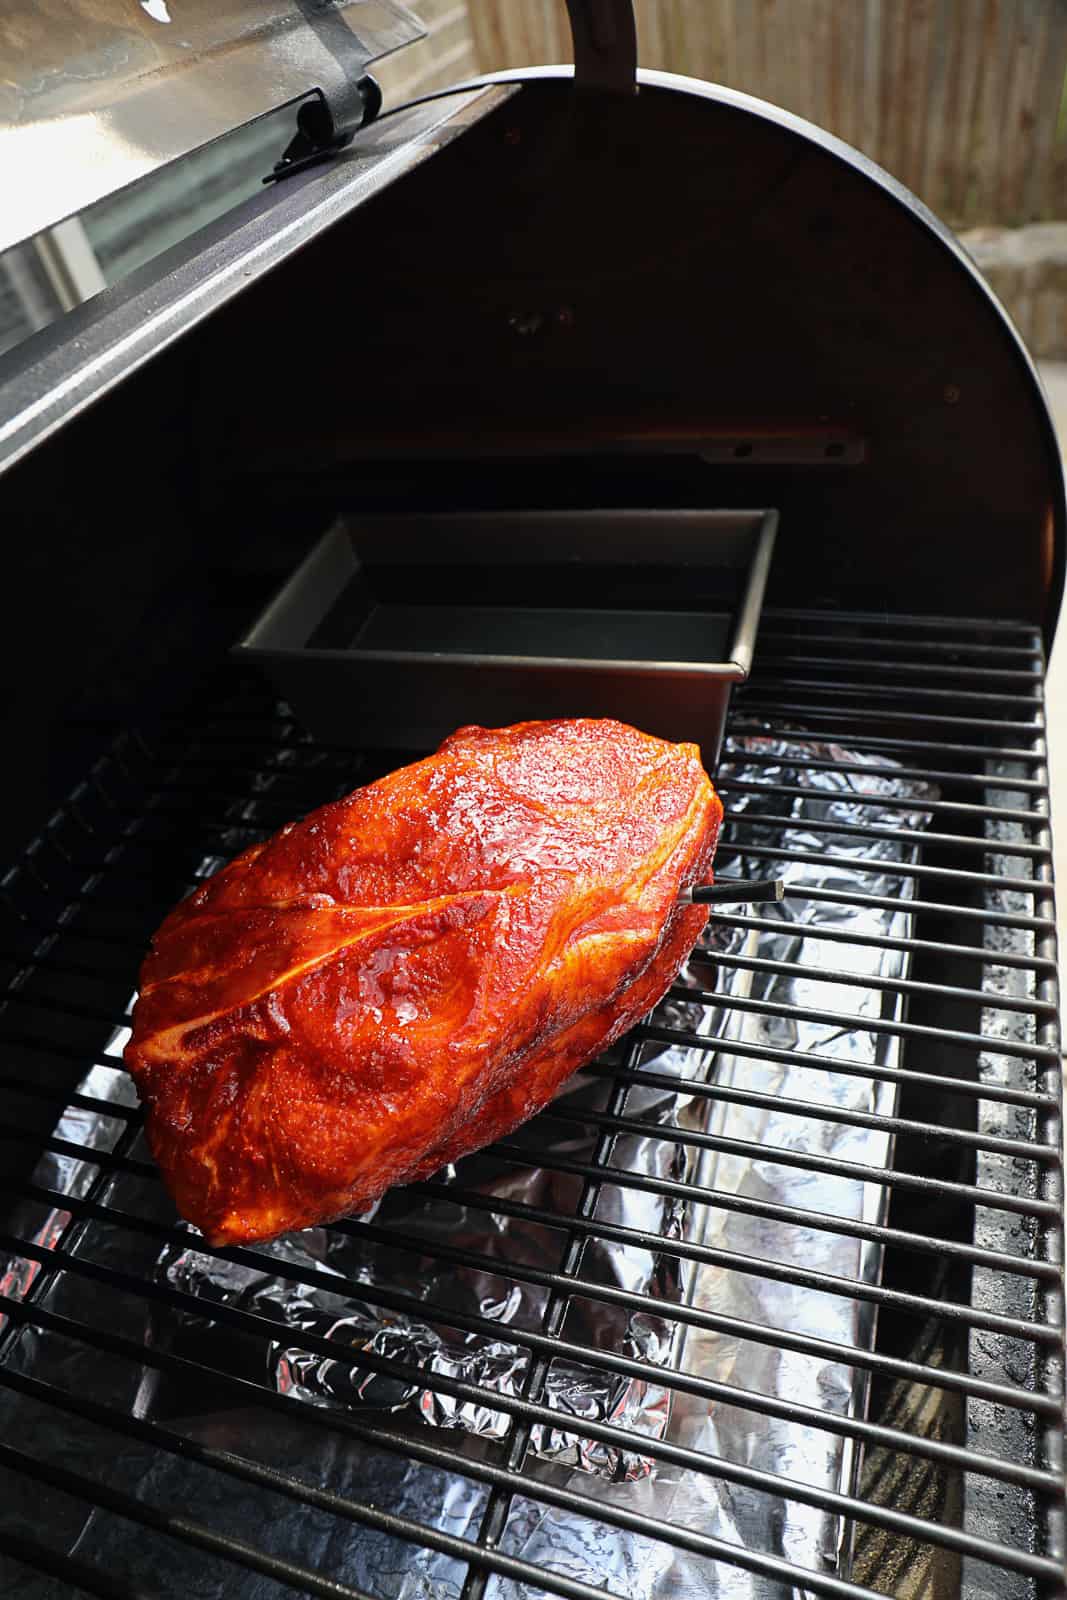 Smoking Bone In Pork Shoulder on Traeger Grills With water bowl to the side